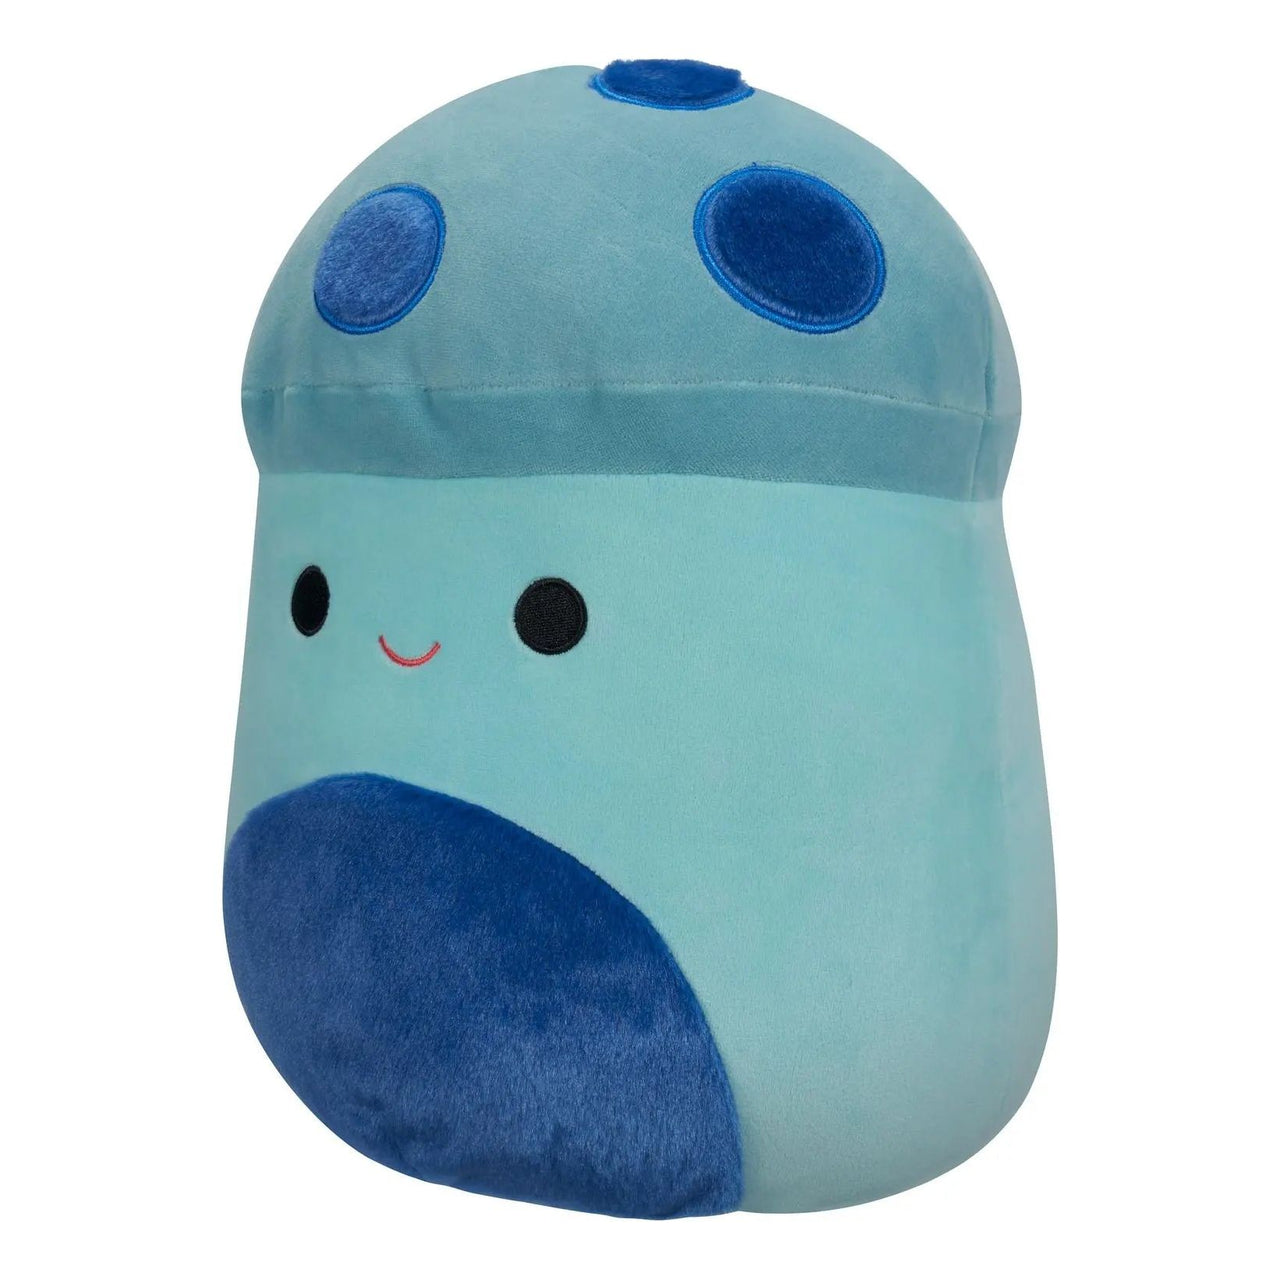 Squishmallows 12" Ankur the Teal Mushroom with Blue Fuzzy Spots Plush Squishmallows